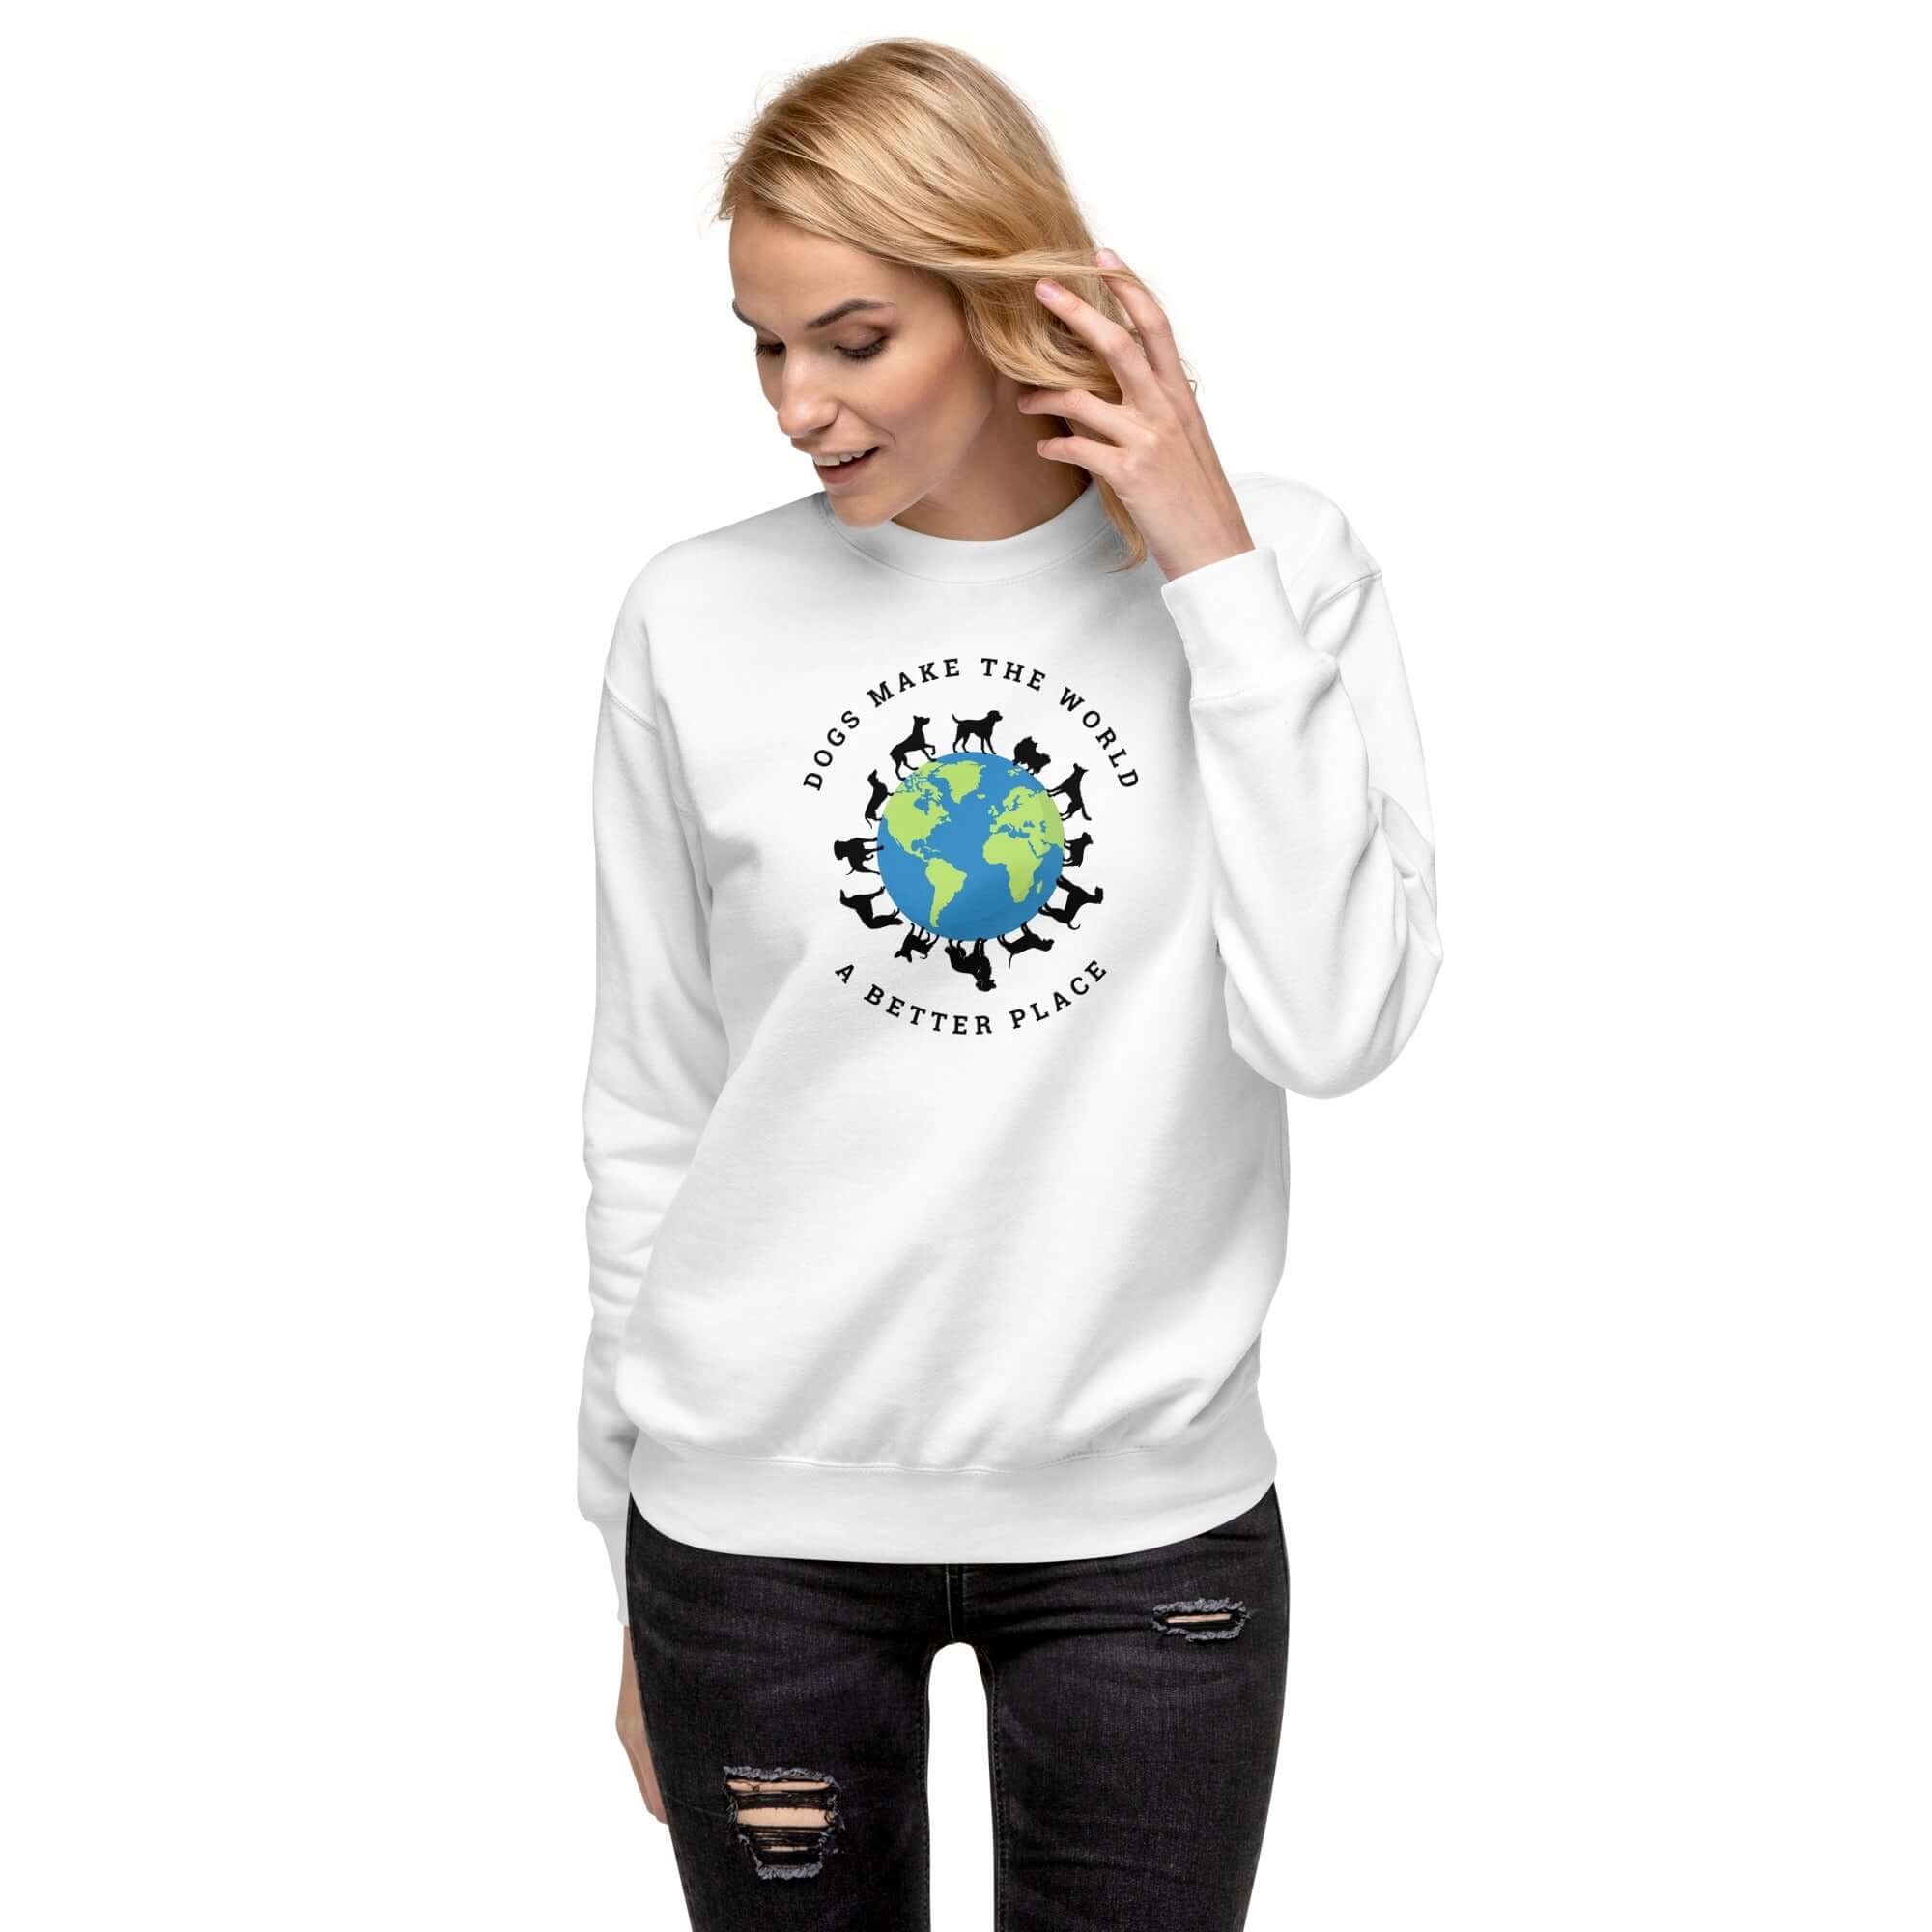 Better Place Crewneck Sweatshirt - TAILWAGS UNLIMITED